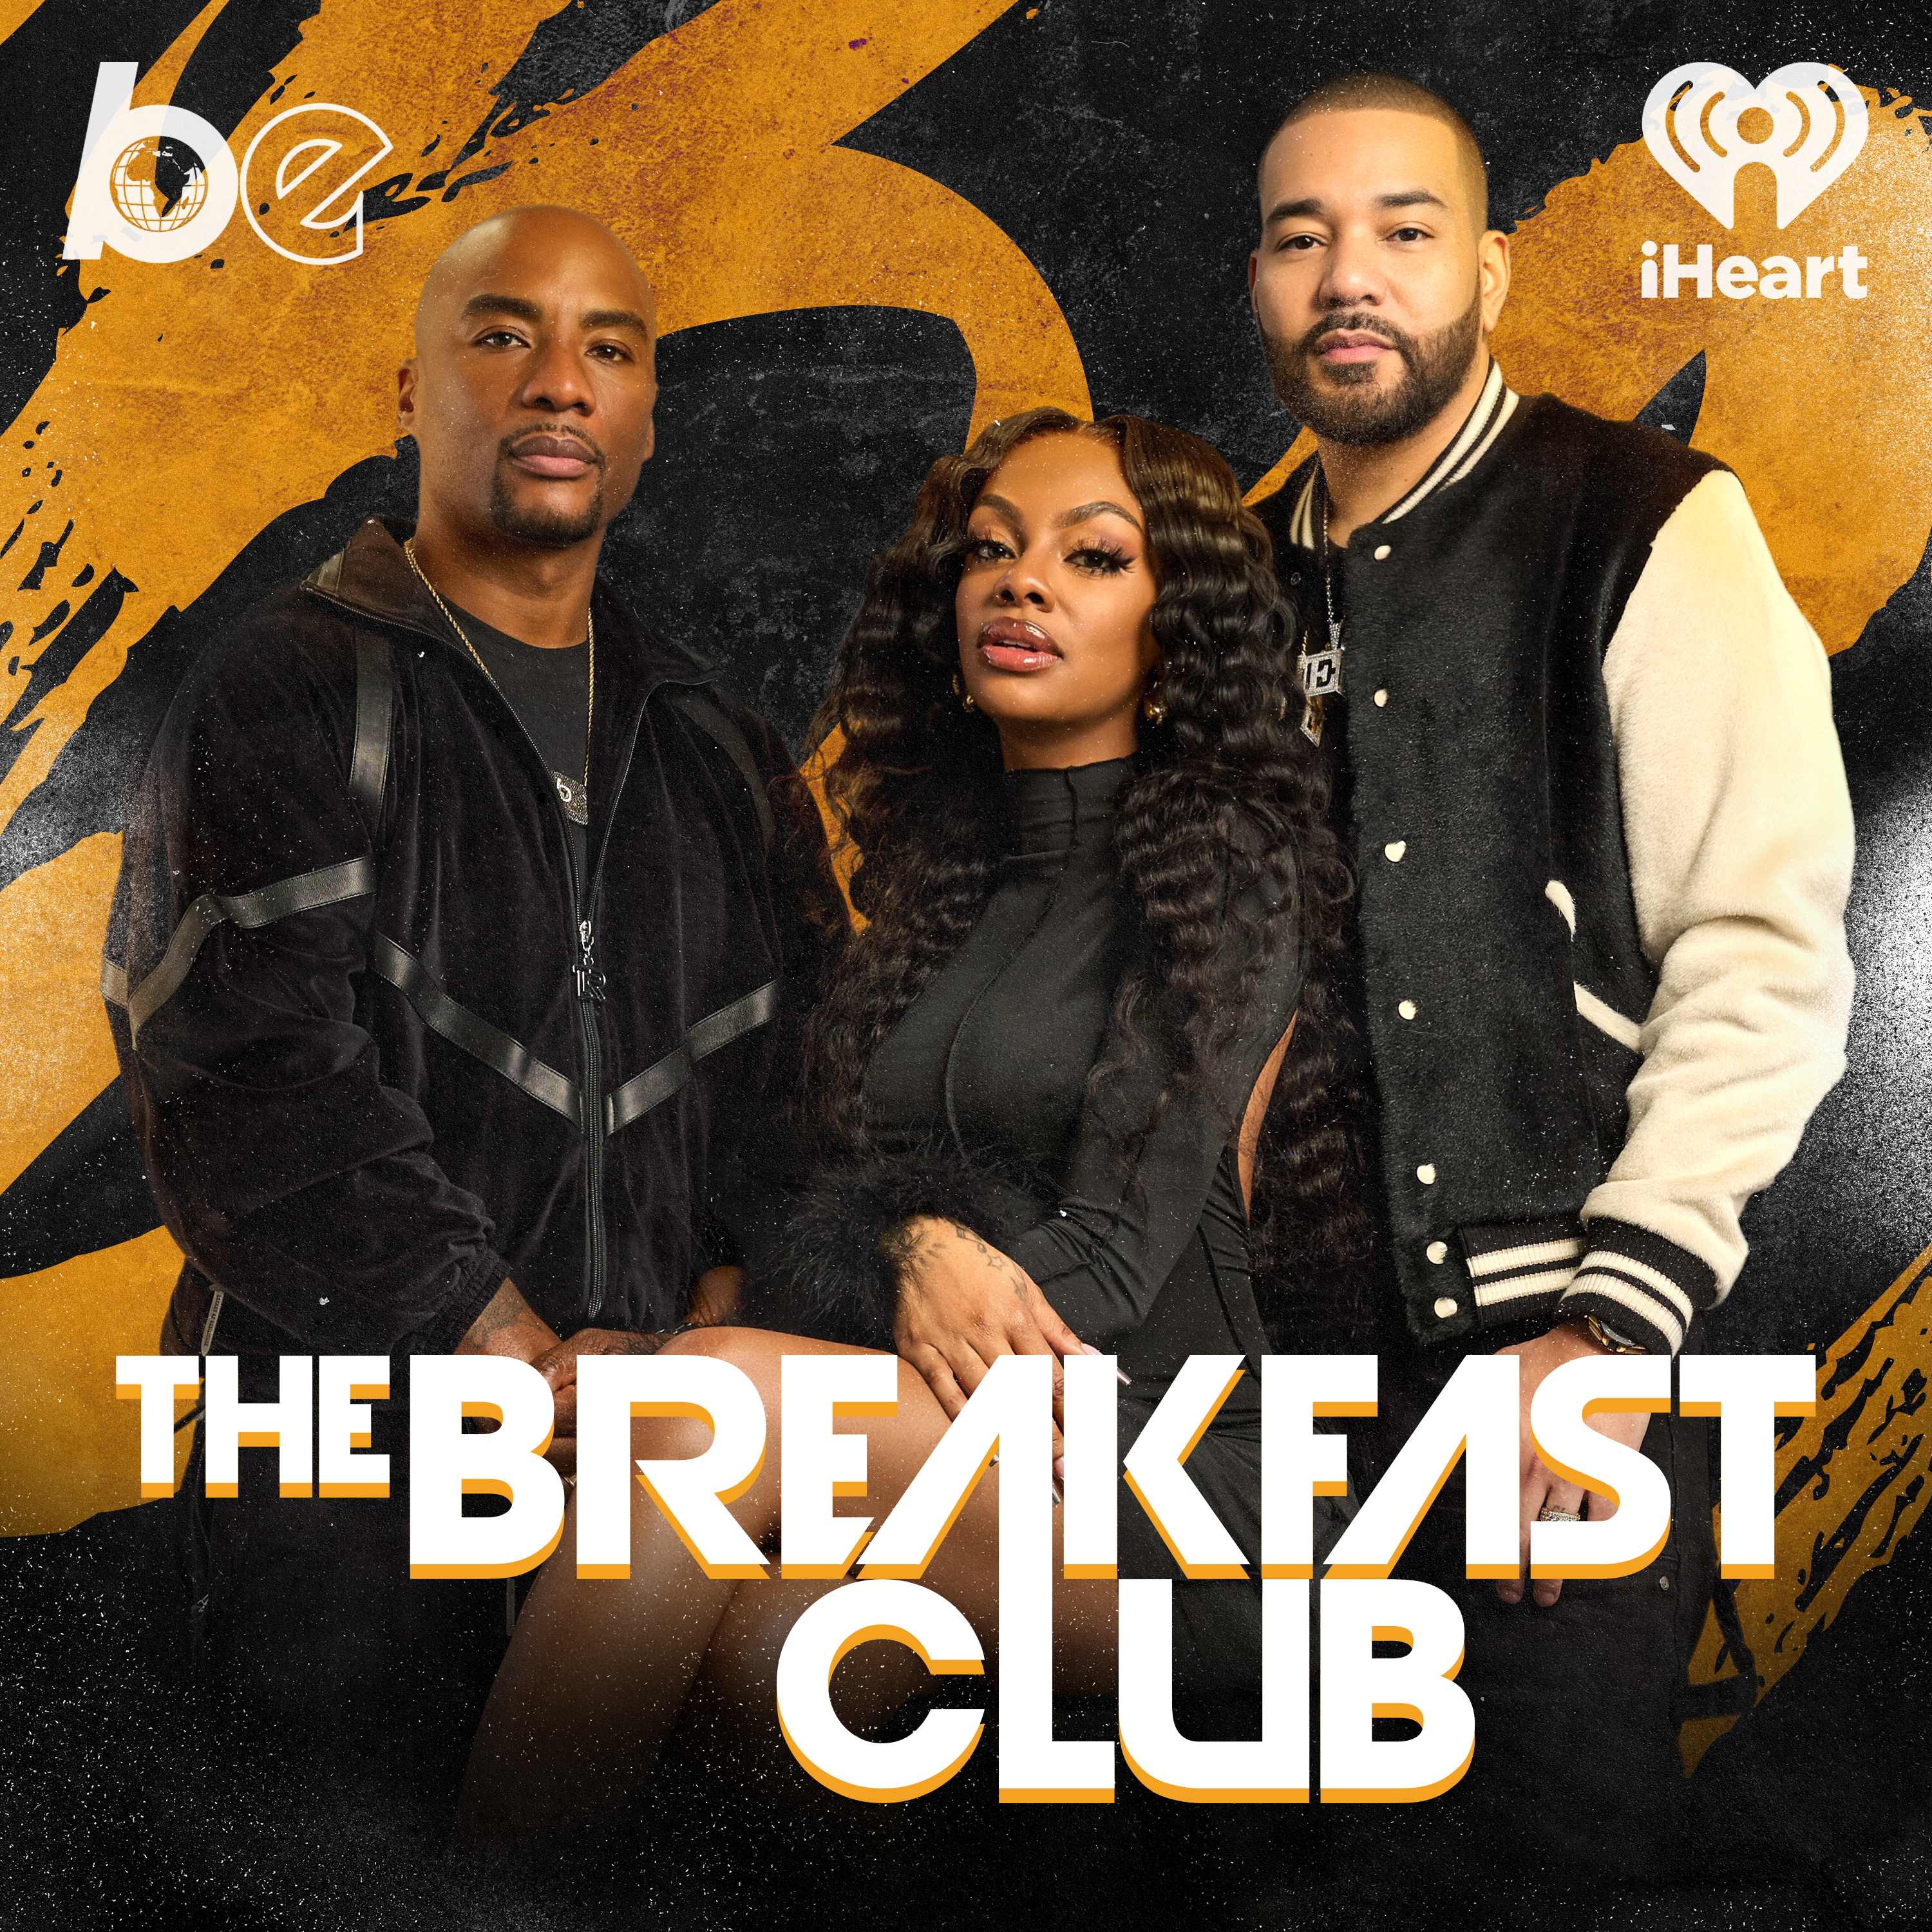 The Breakfast Club Best Of Episode(Joe Clair Interview, LL Cool J And The Roots Interview, Fab Five Freddy Interview, What Makes You Not Want To Hook Up With A Guy?)